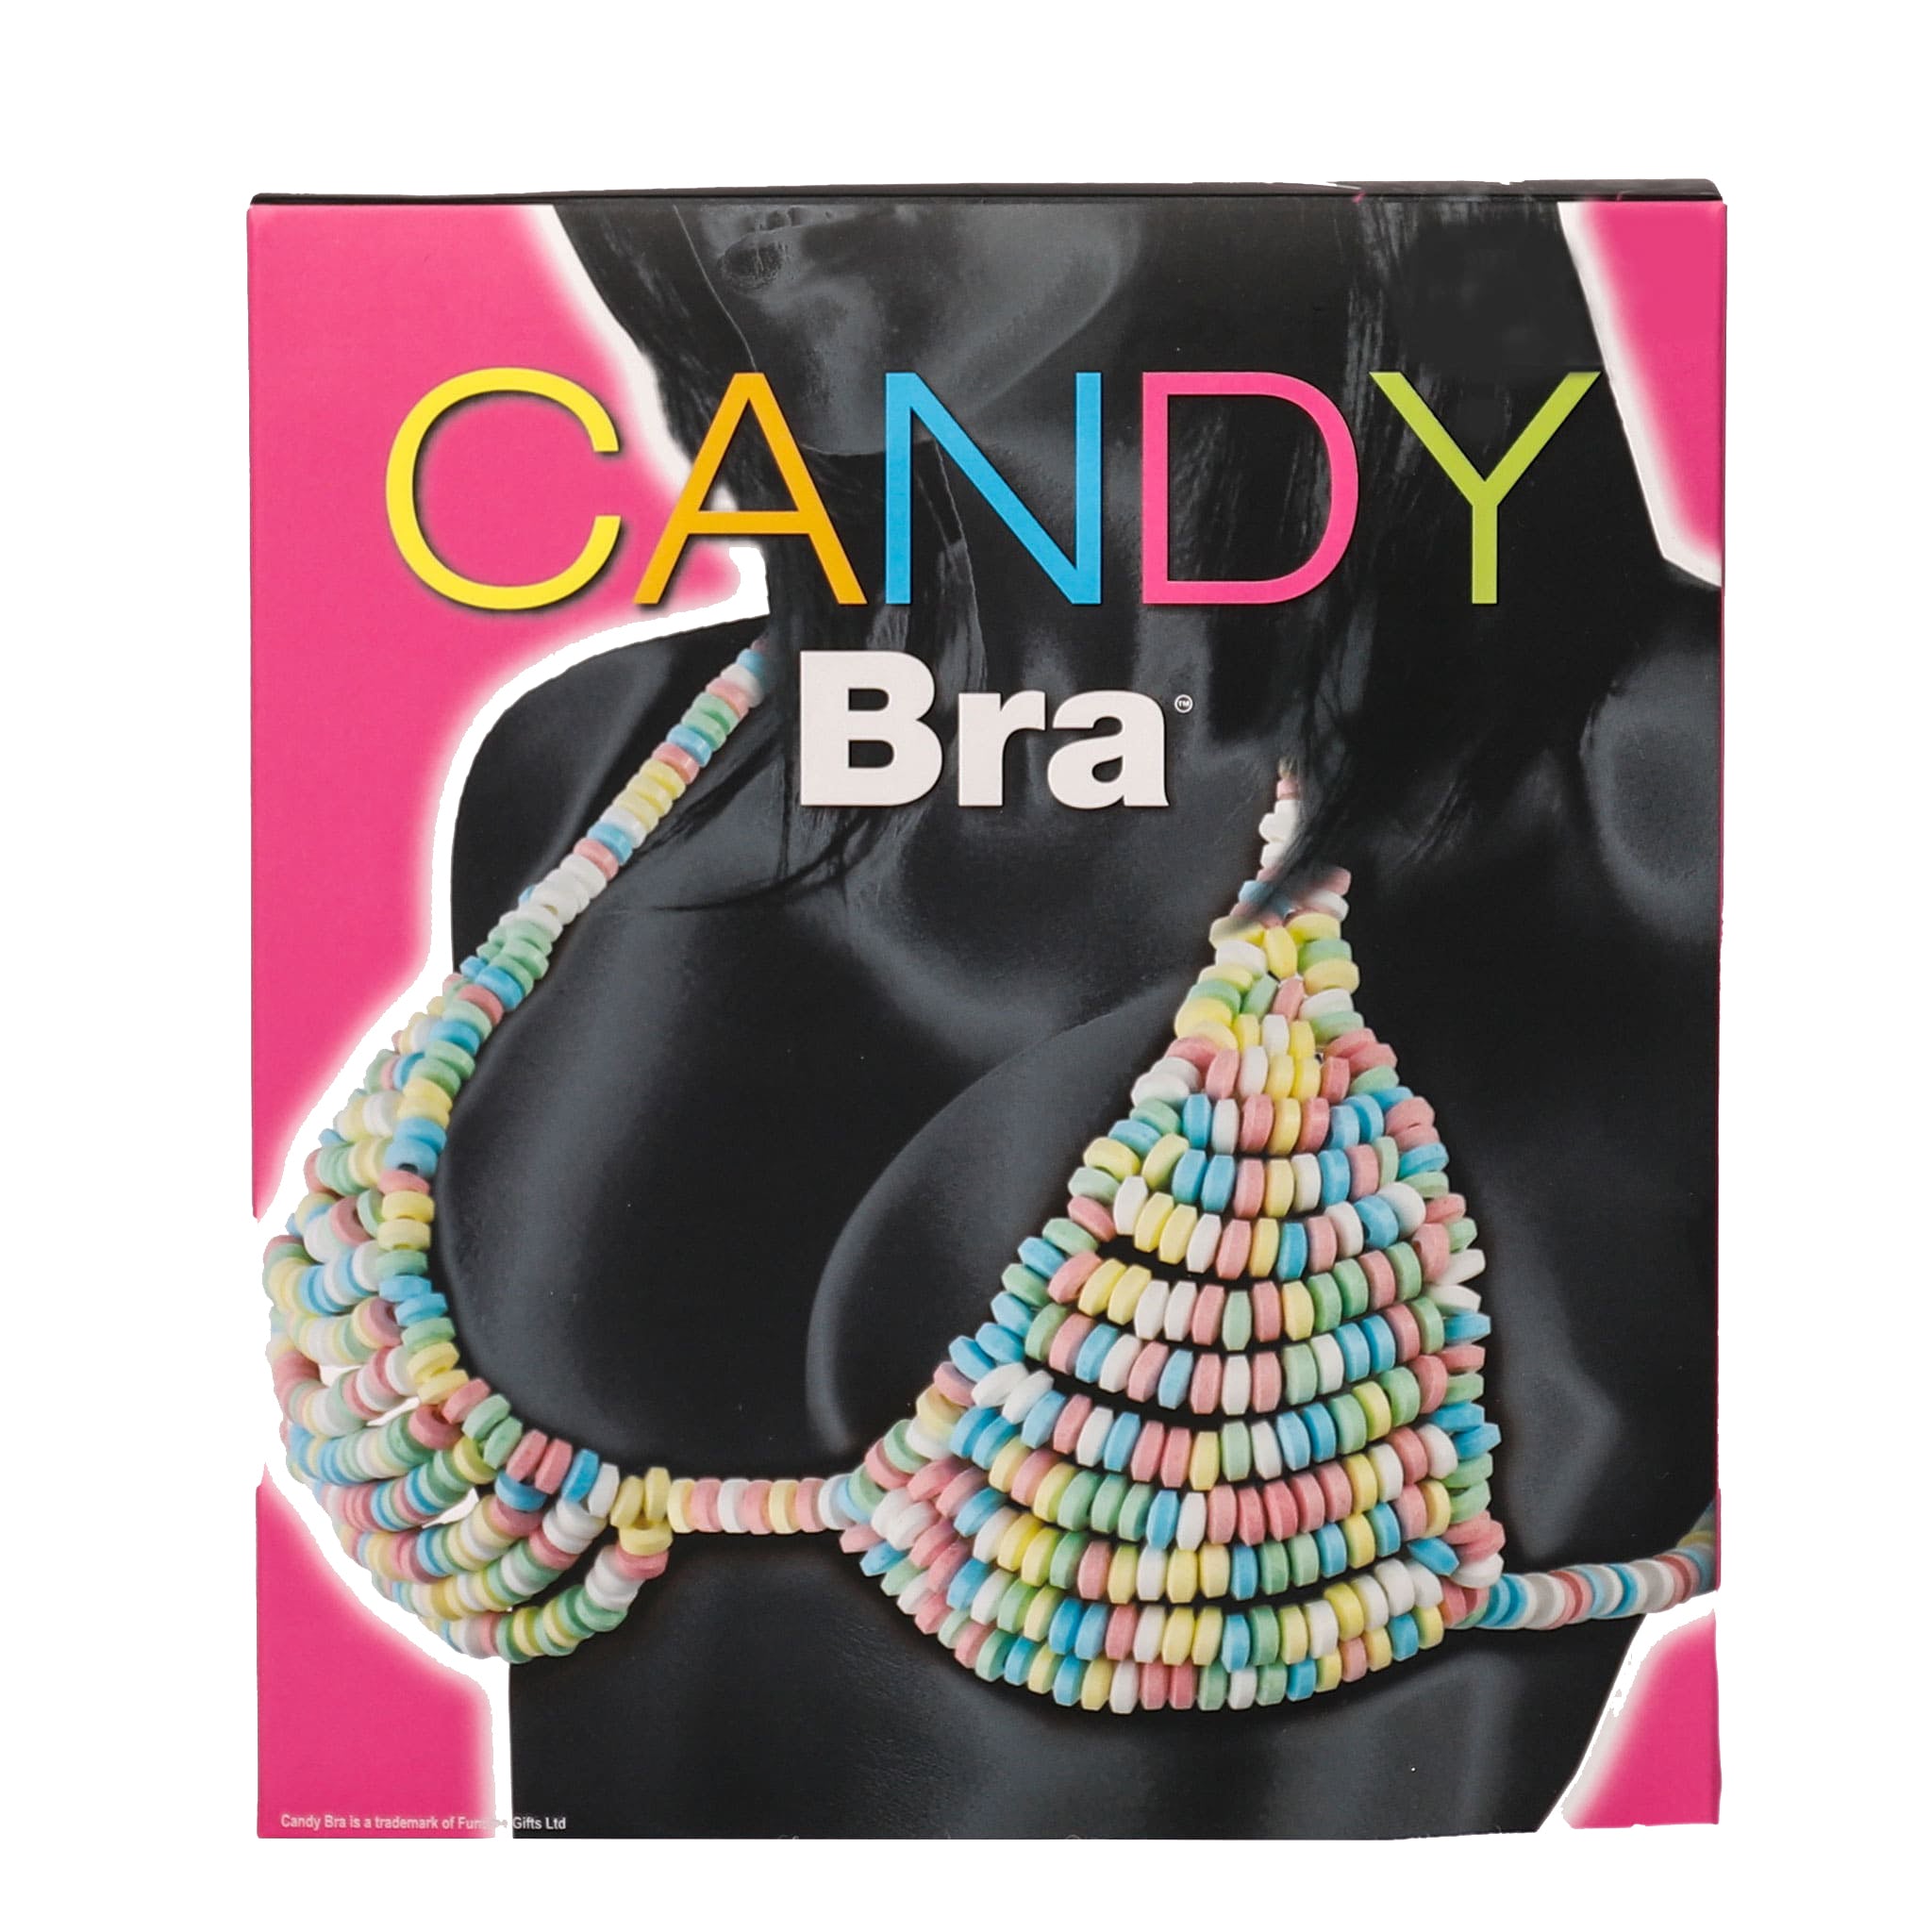 Candy Bra, Bra you can eat